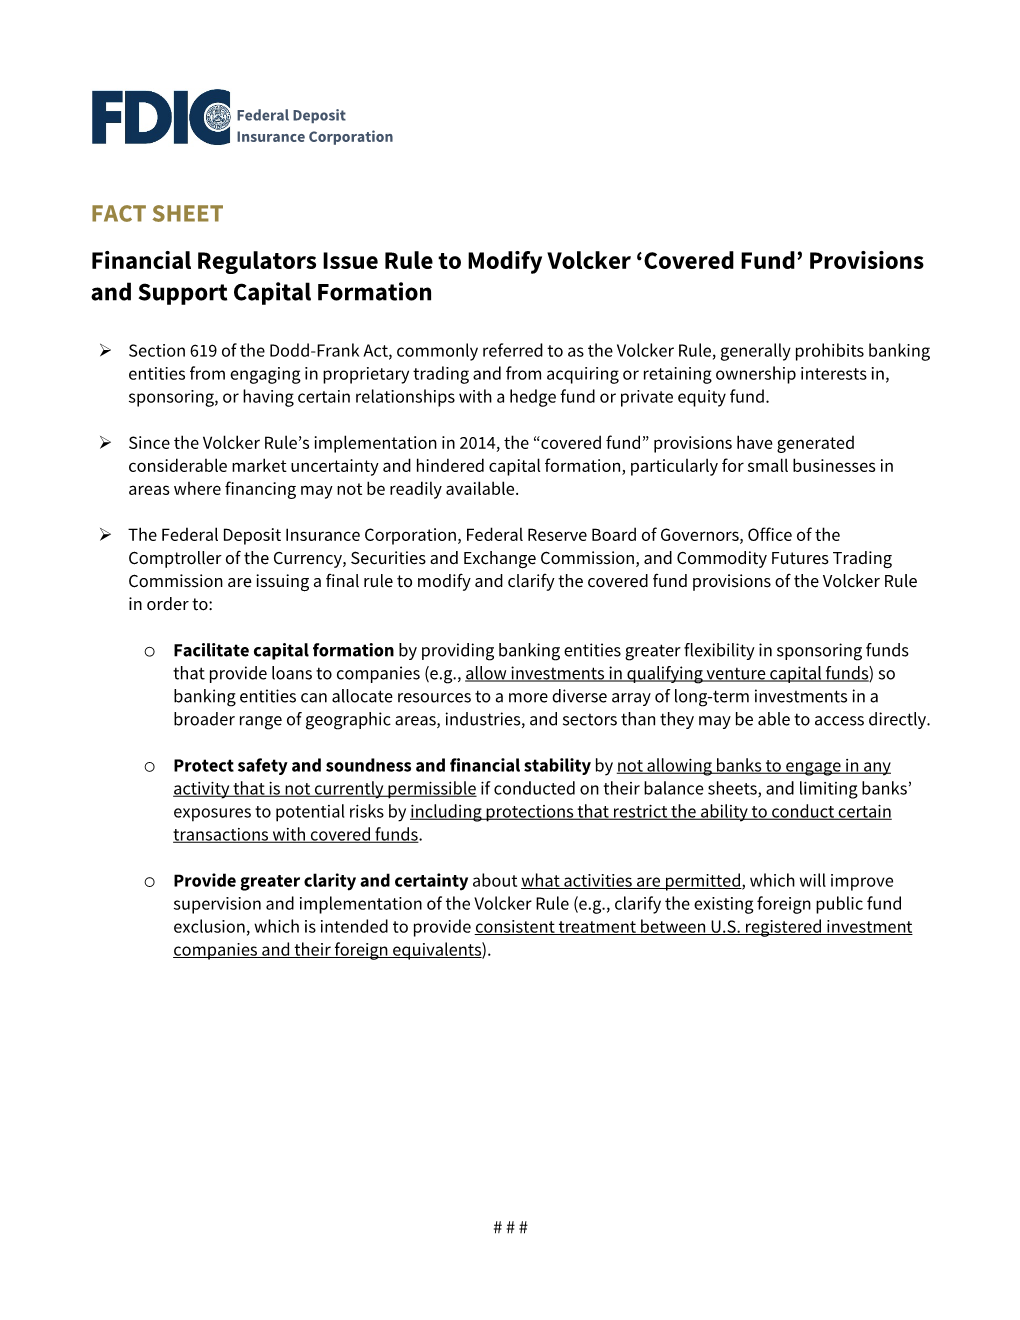 Covered Fund’ Provisions and Support Capital Formation